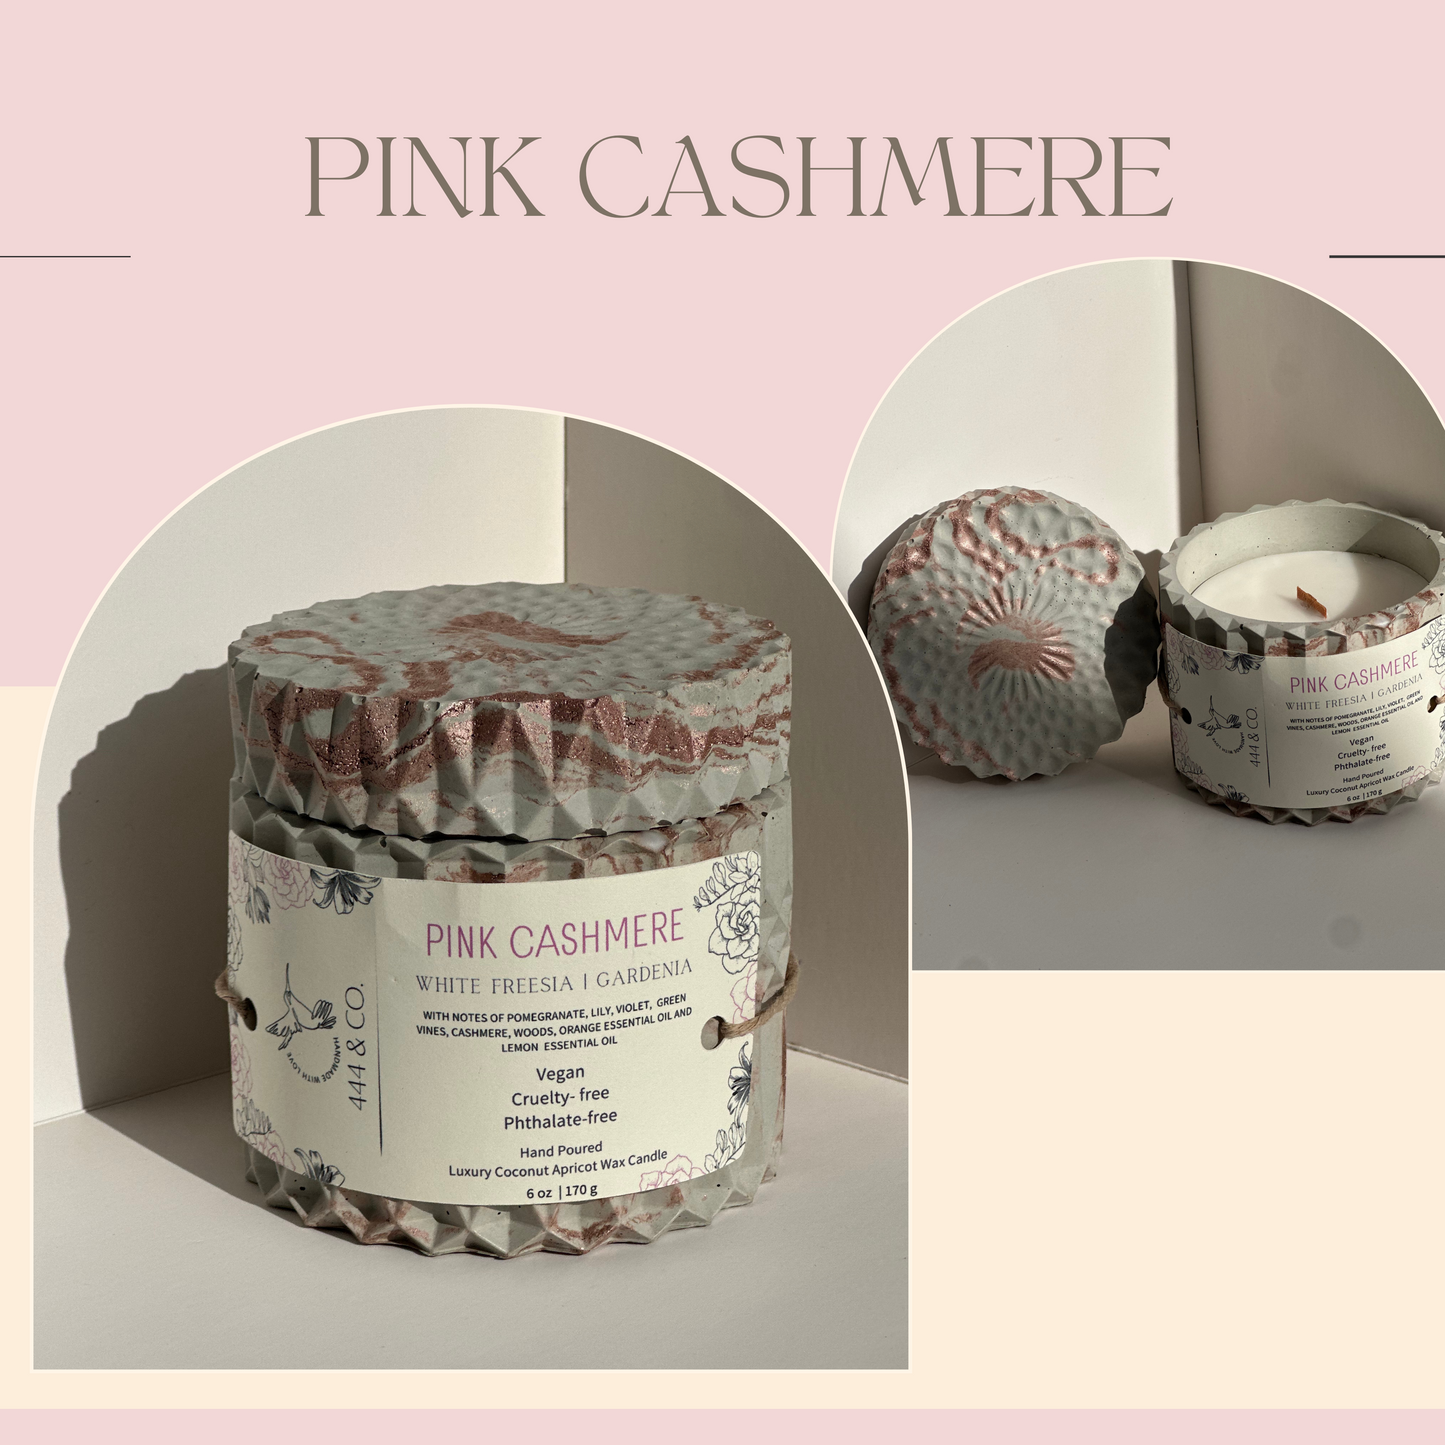 PINK CASHMERE